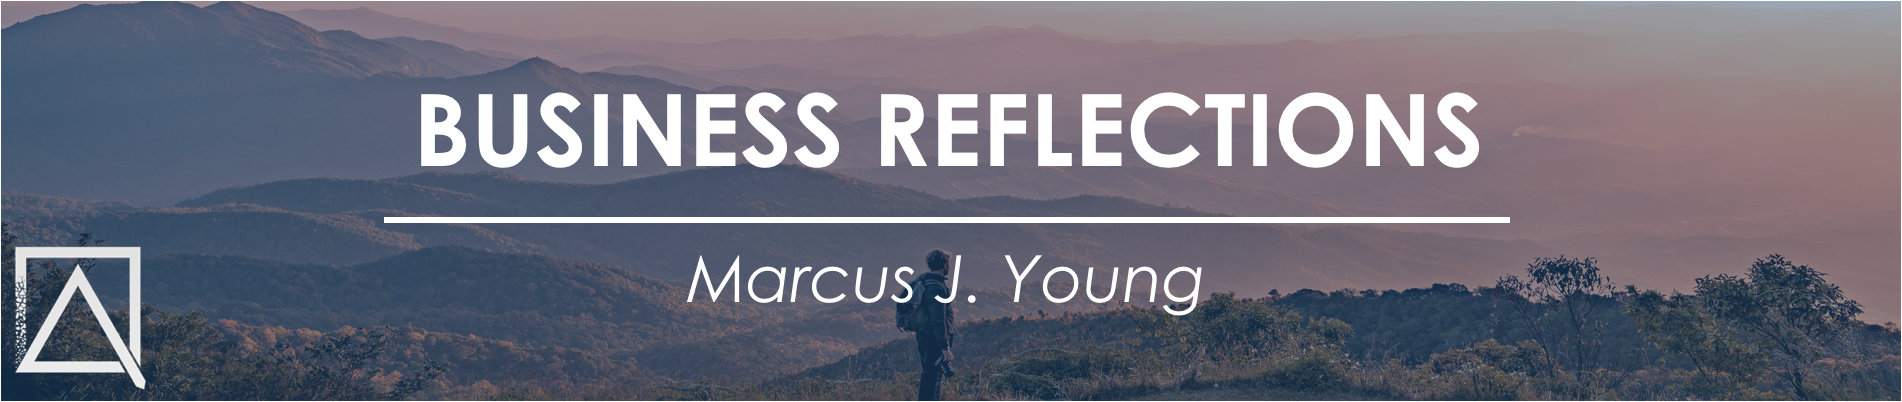 MJY-Blog-Business-Reflections-Banner.png